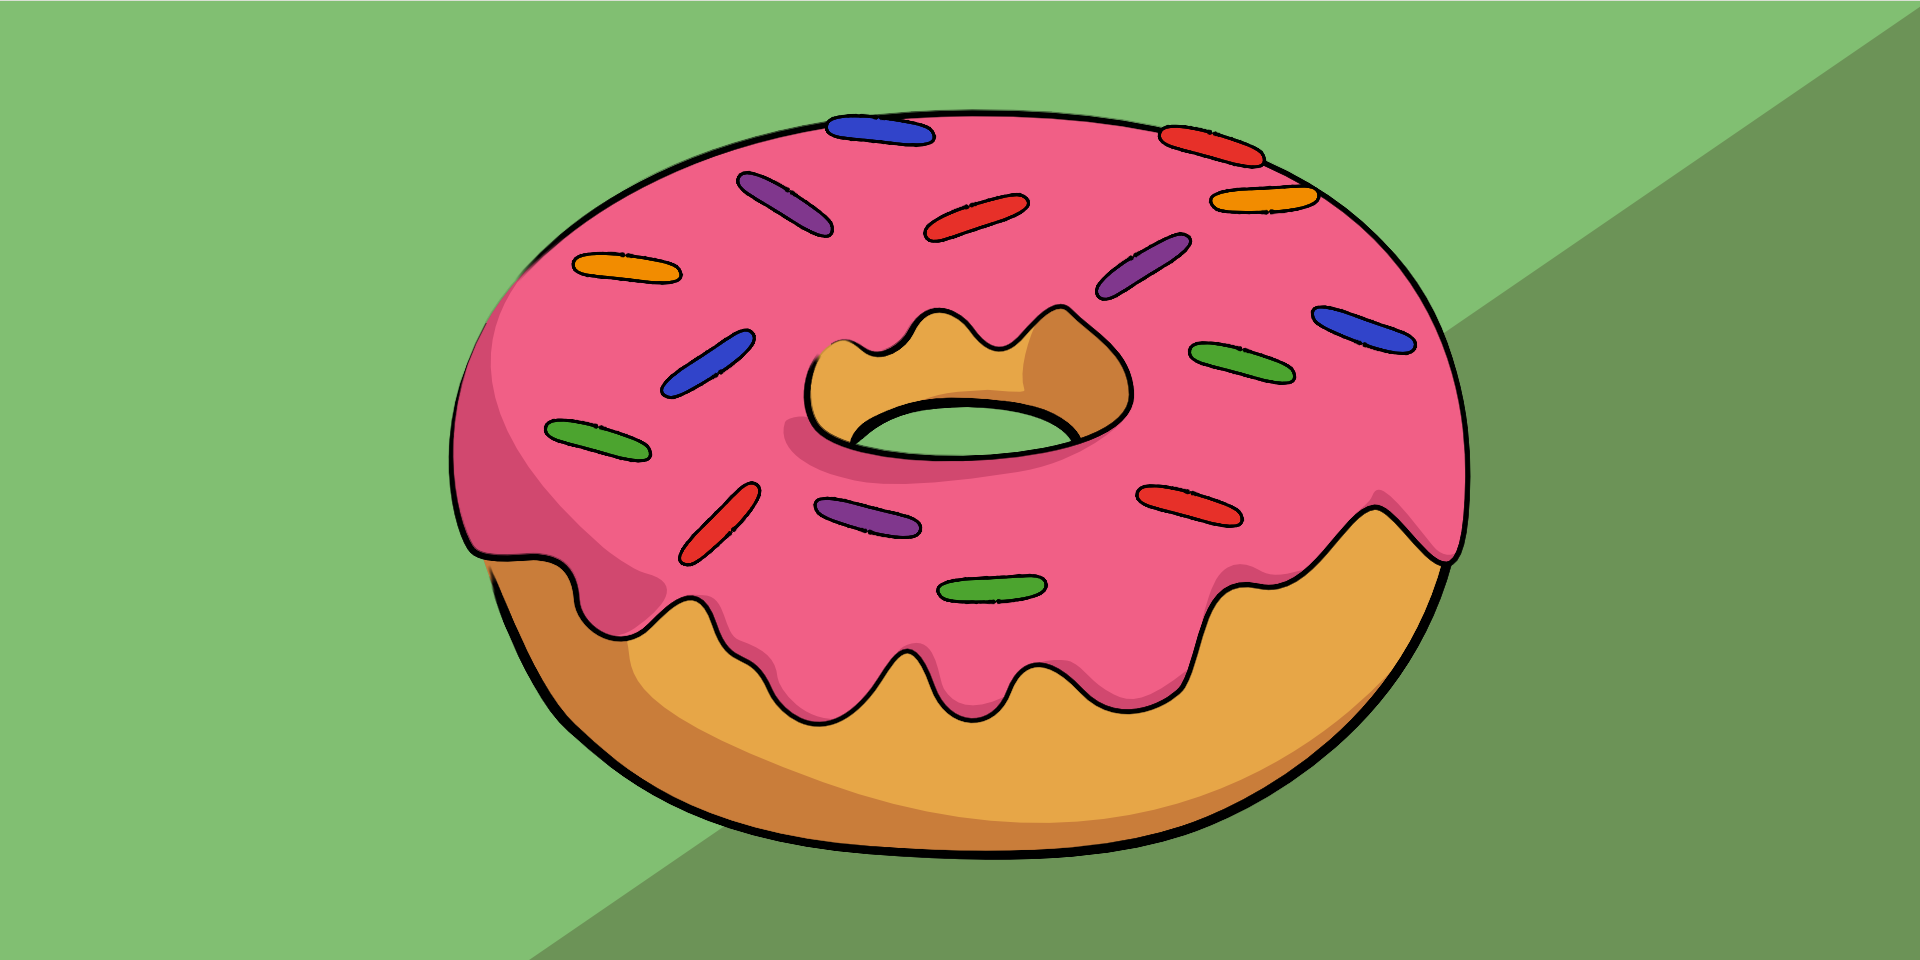 A donut with pink frosting and sprinkles.